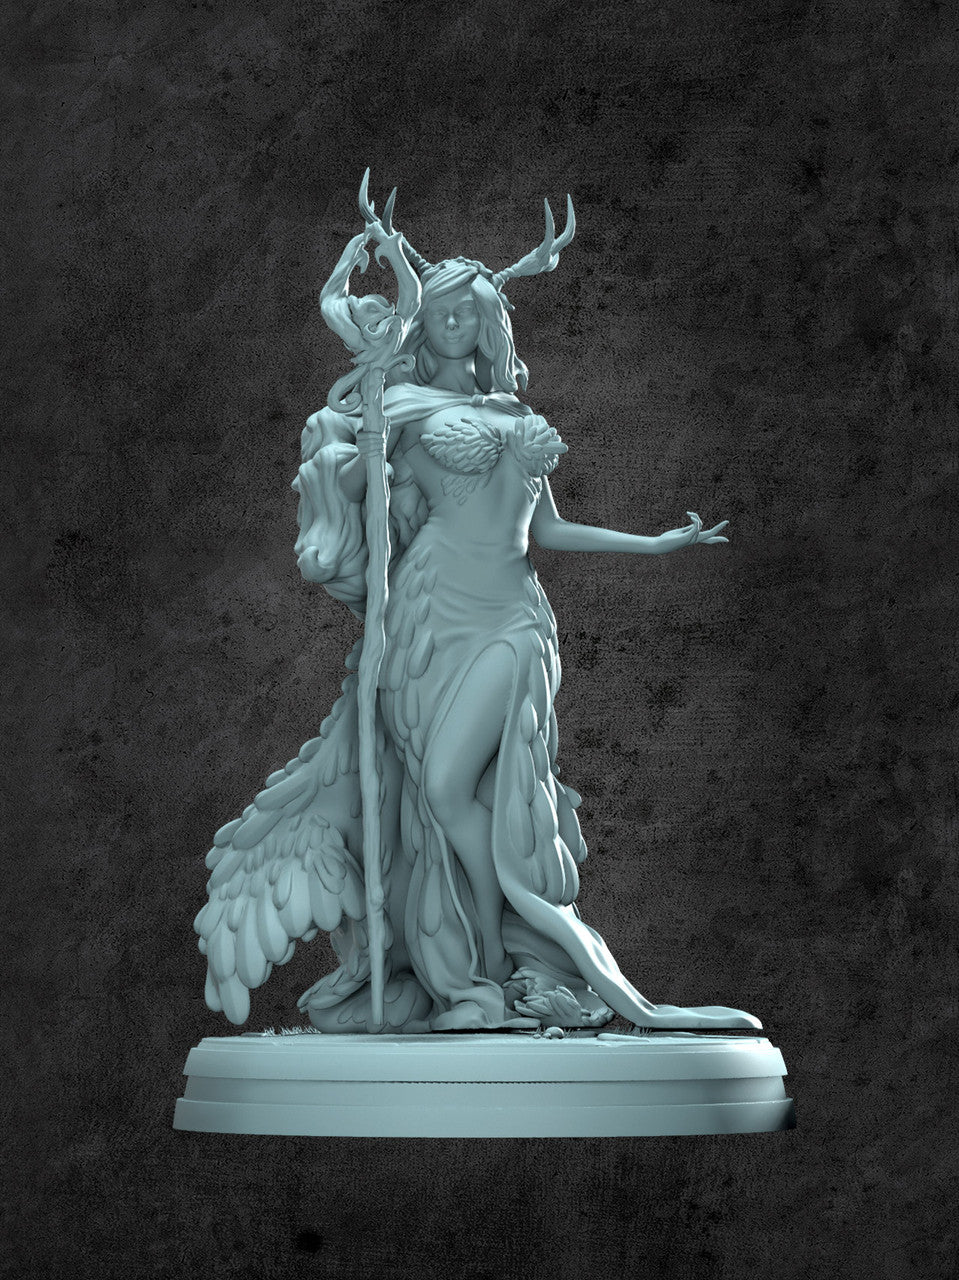 Diana the Druid Miniature for Tabletop RPGs